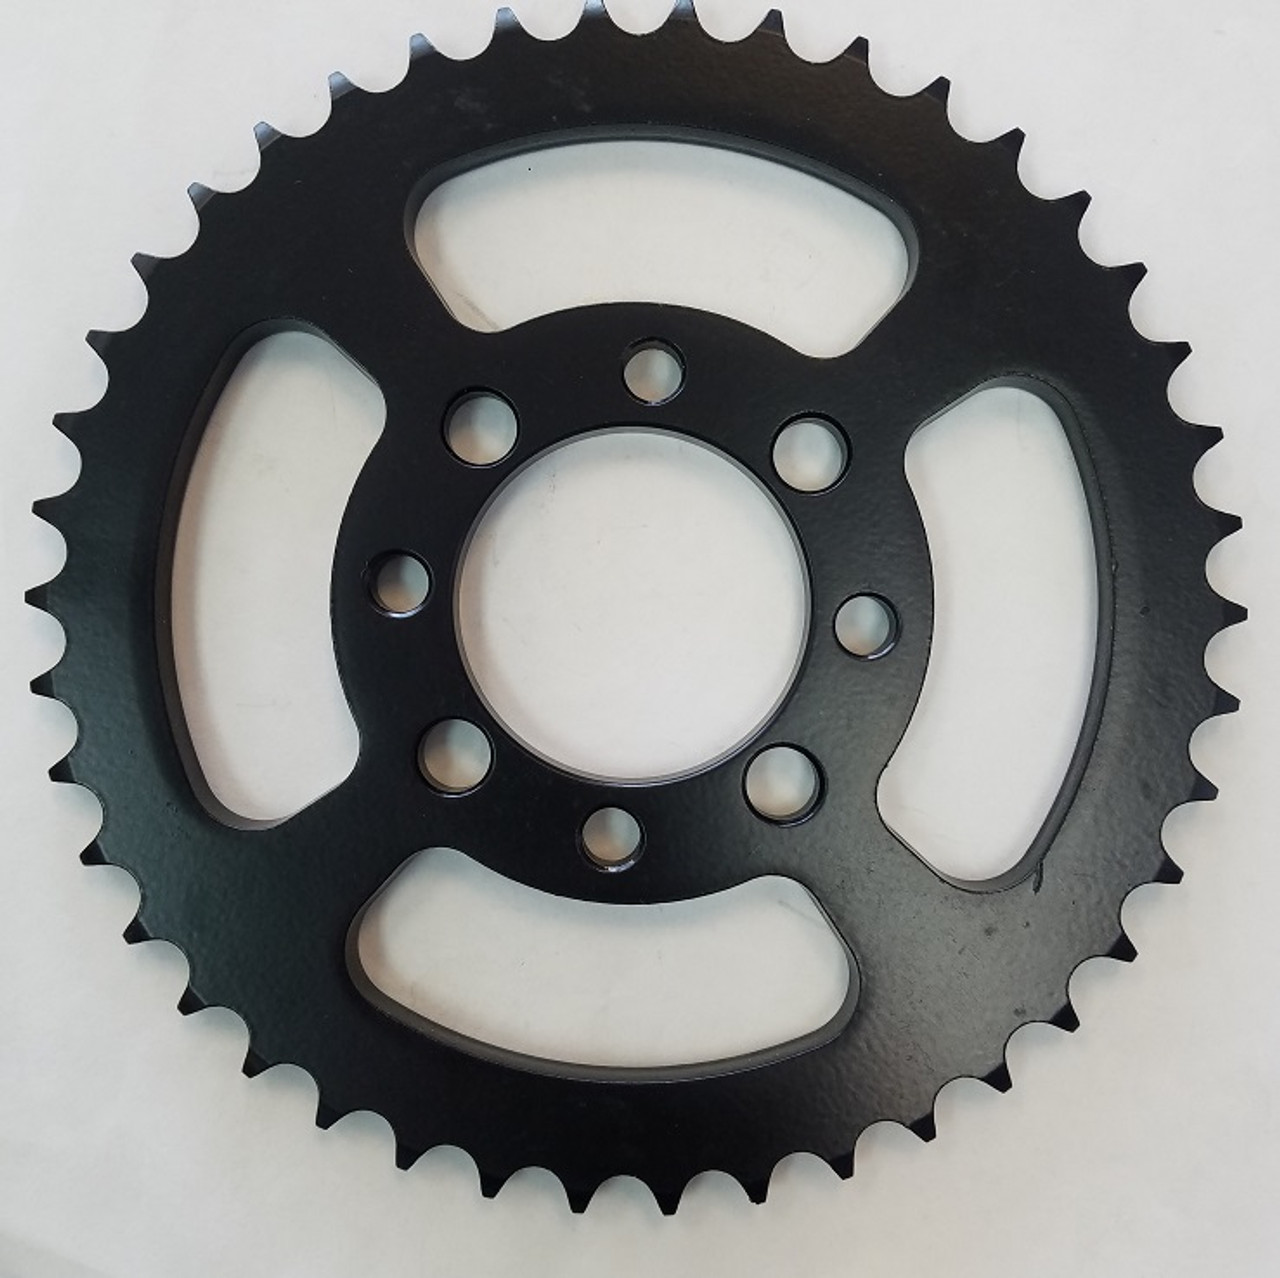 420 Taotao, Kayo, Coolster and Apollo Rear Sprocket (Higher Quality) - 68mm mounting diameter